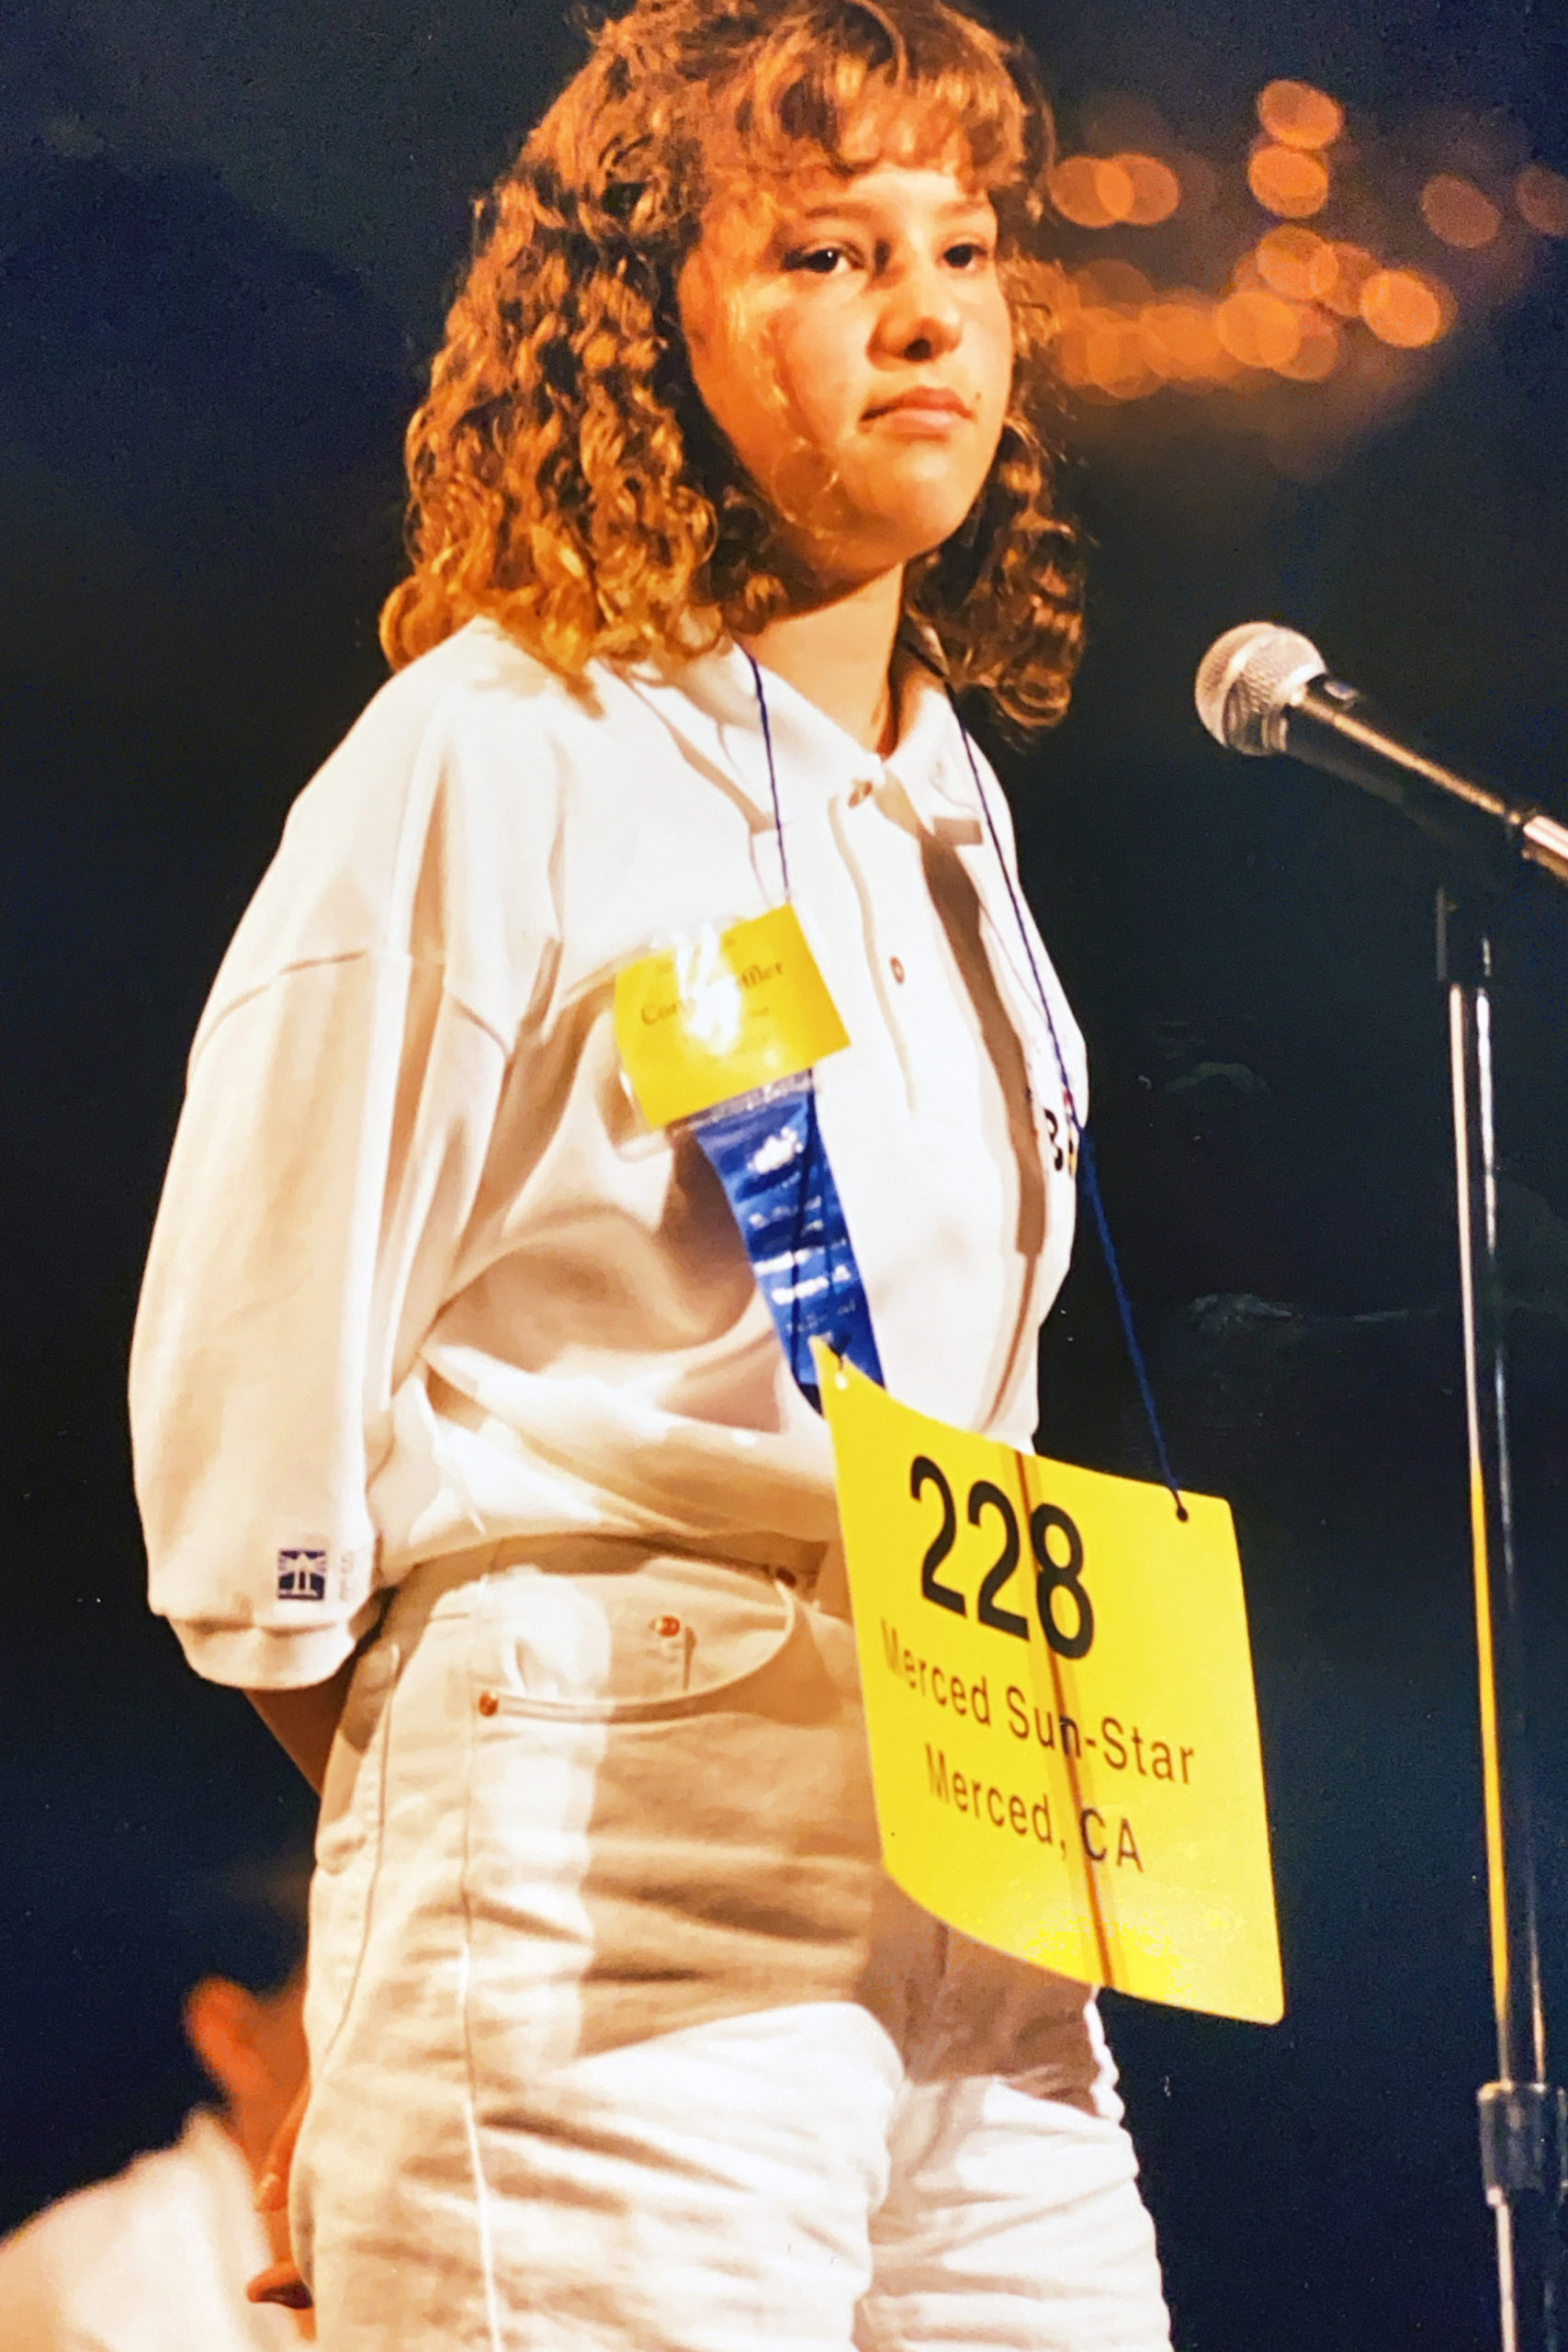 Corrie Loeffler competed in the Scripps National Spelling Bee representing Merced County, California.